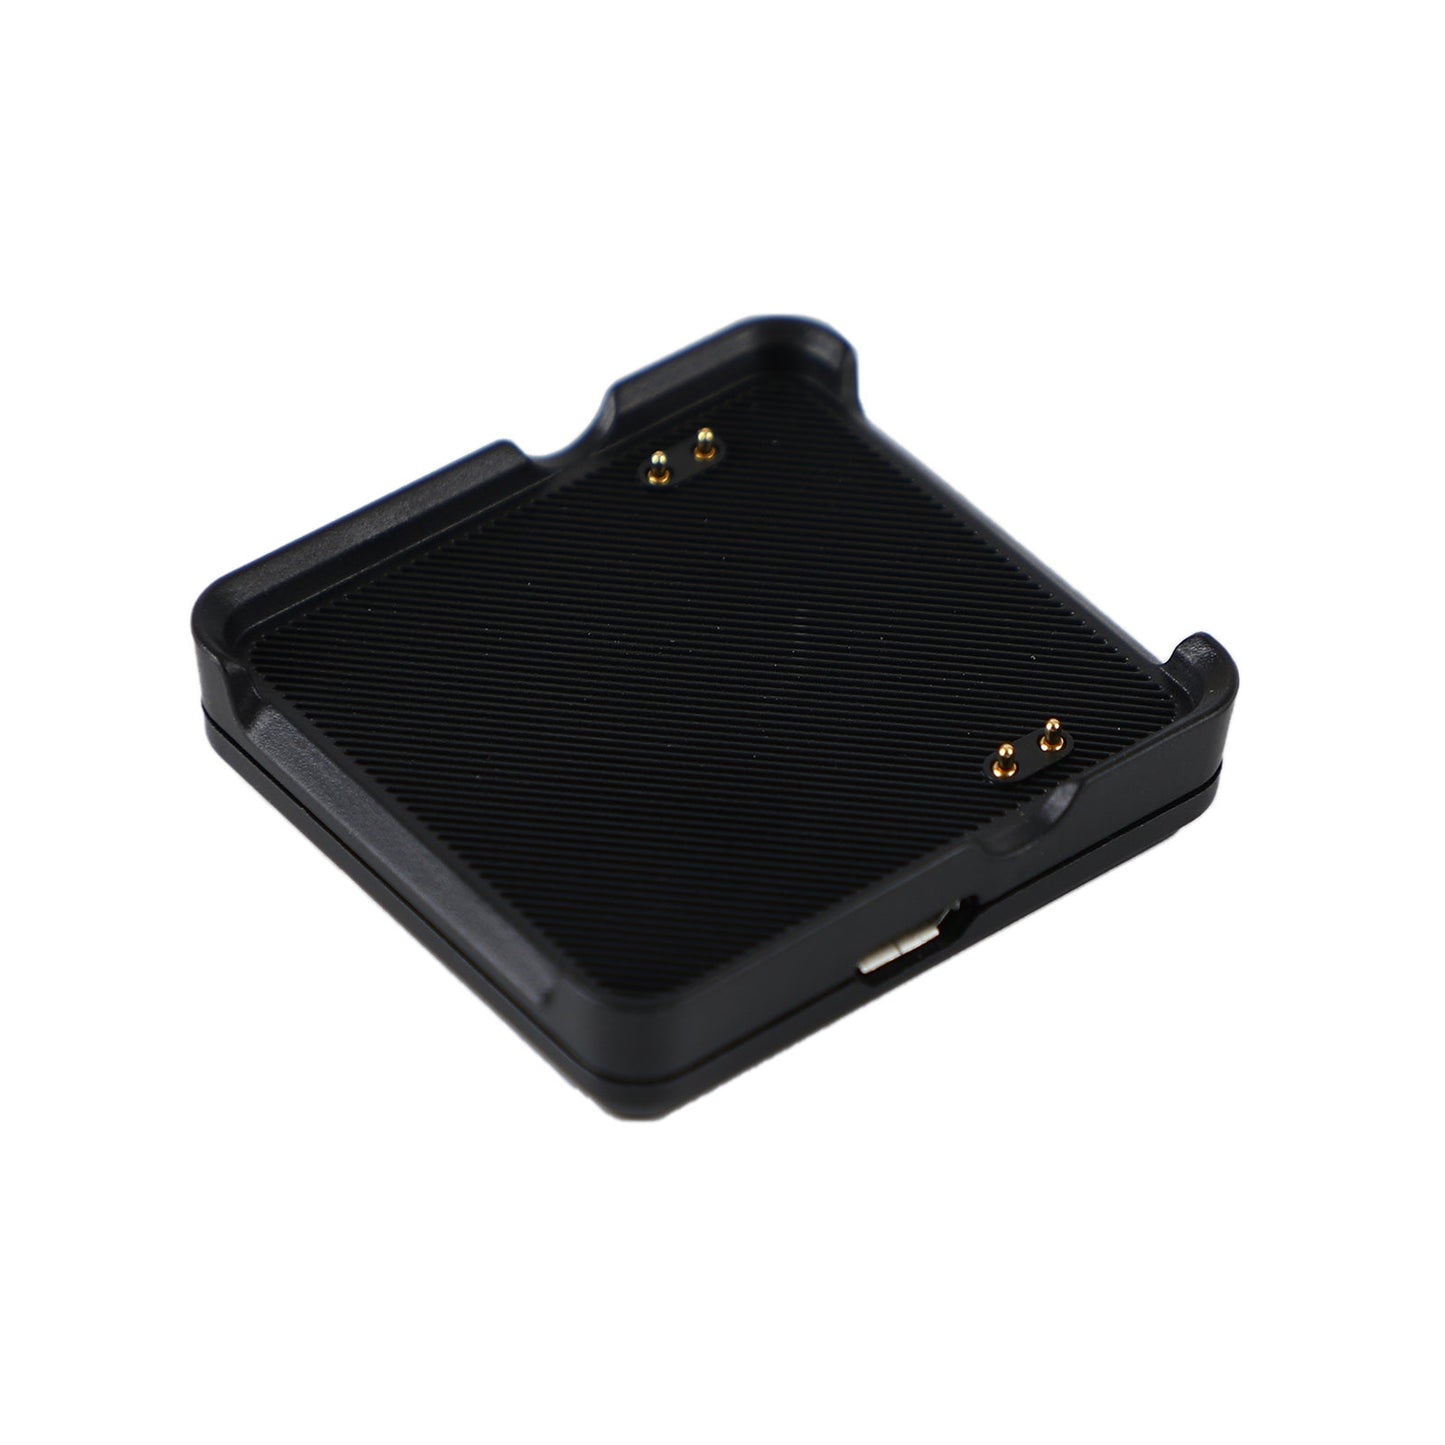 Replacement Charging Cradle Dock Synchronous Data for Vivoactive GPS Smart Watch